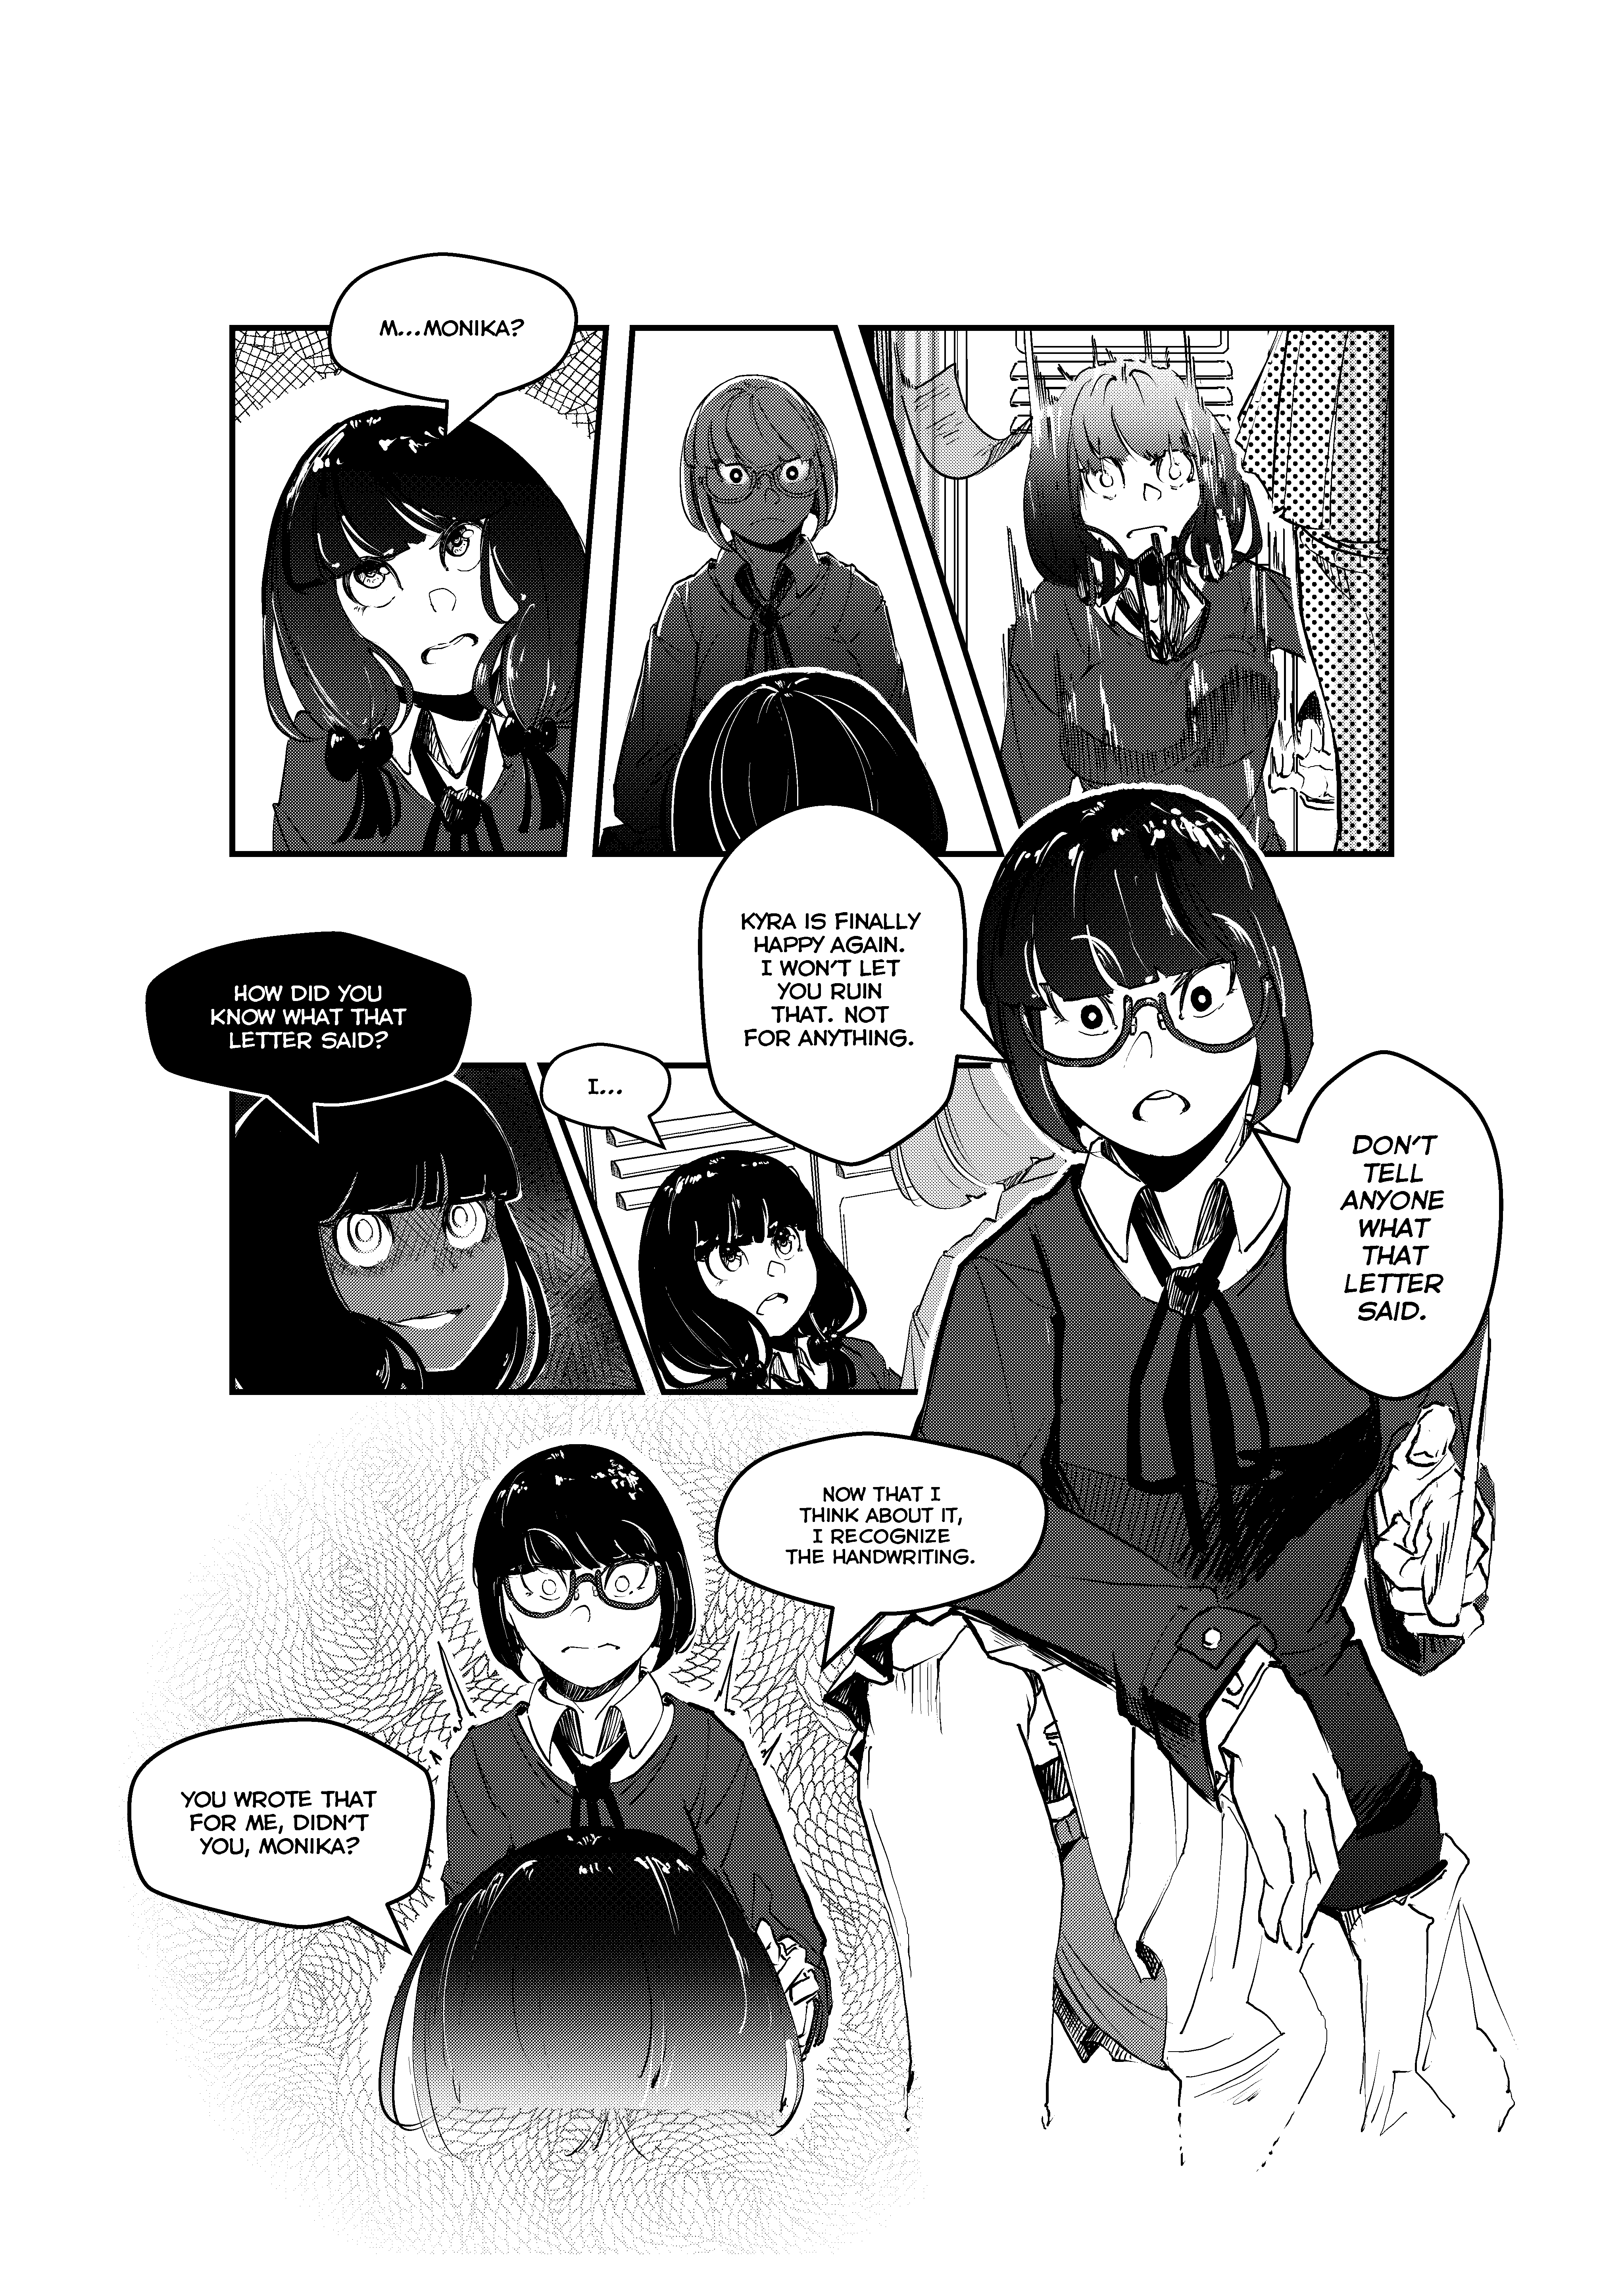 Opposites In Disguise - 16 page 23-03326f7b